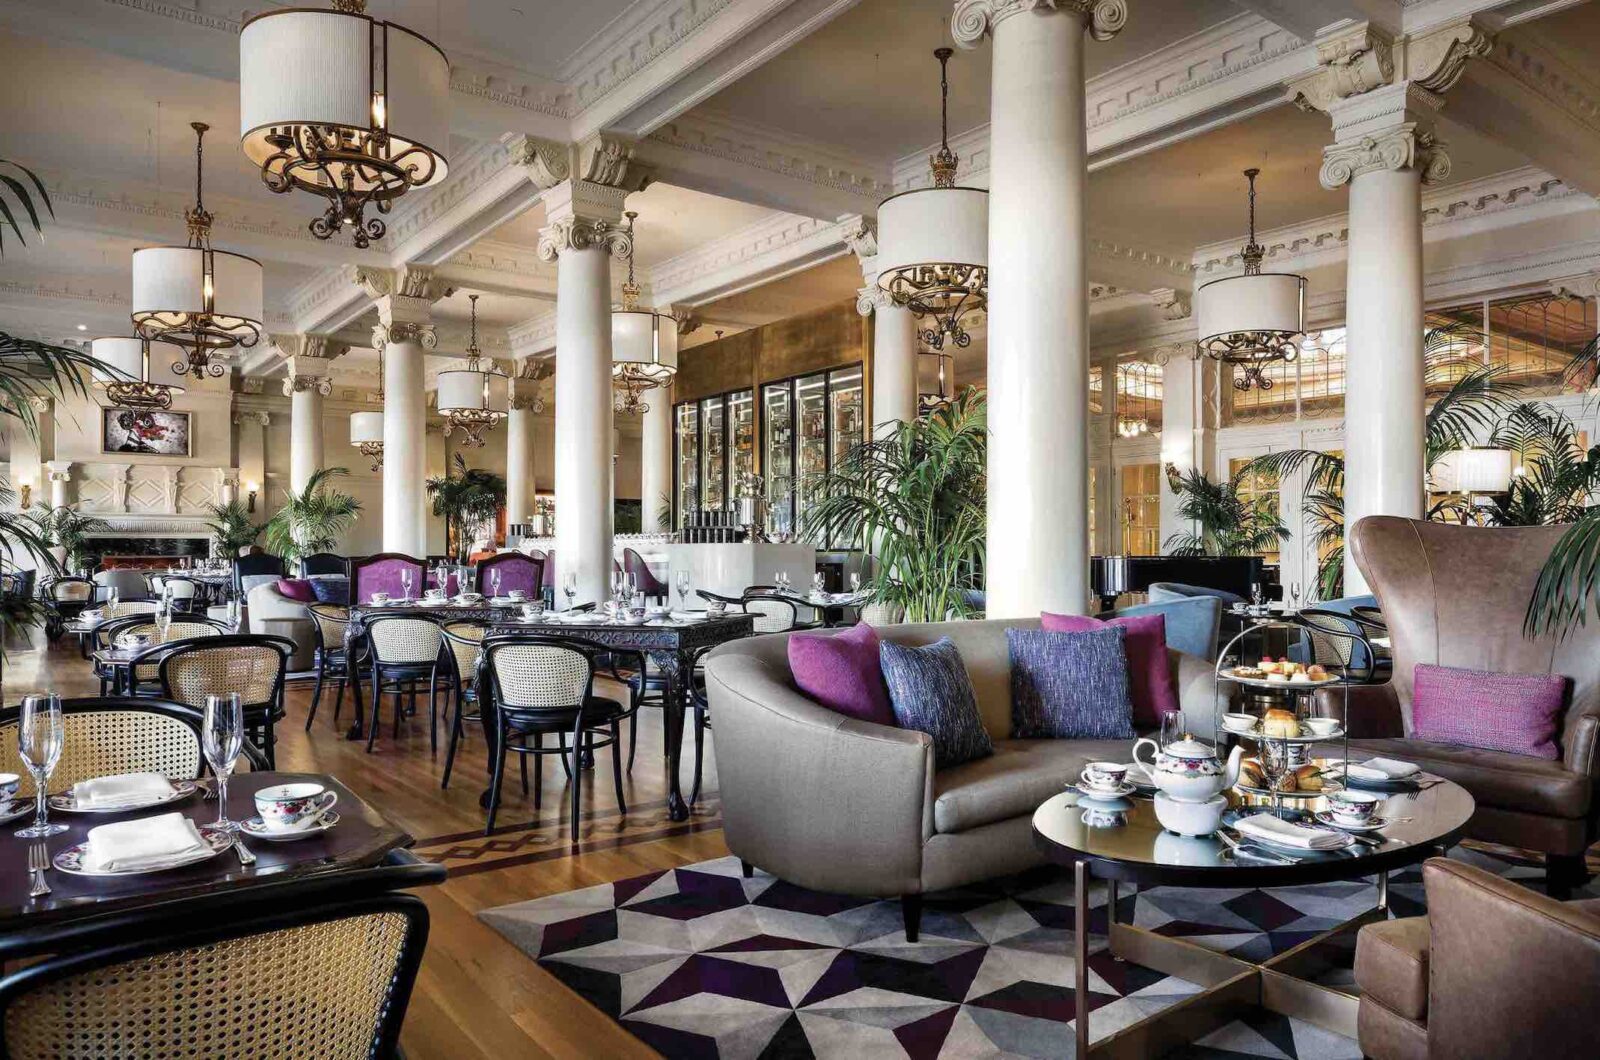 Fairmont Empress high tea lounge with afternoon tea experience